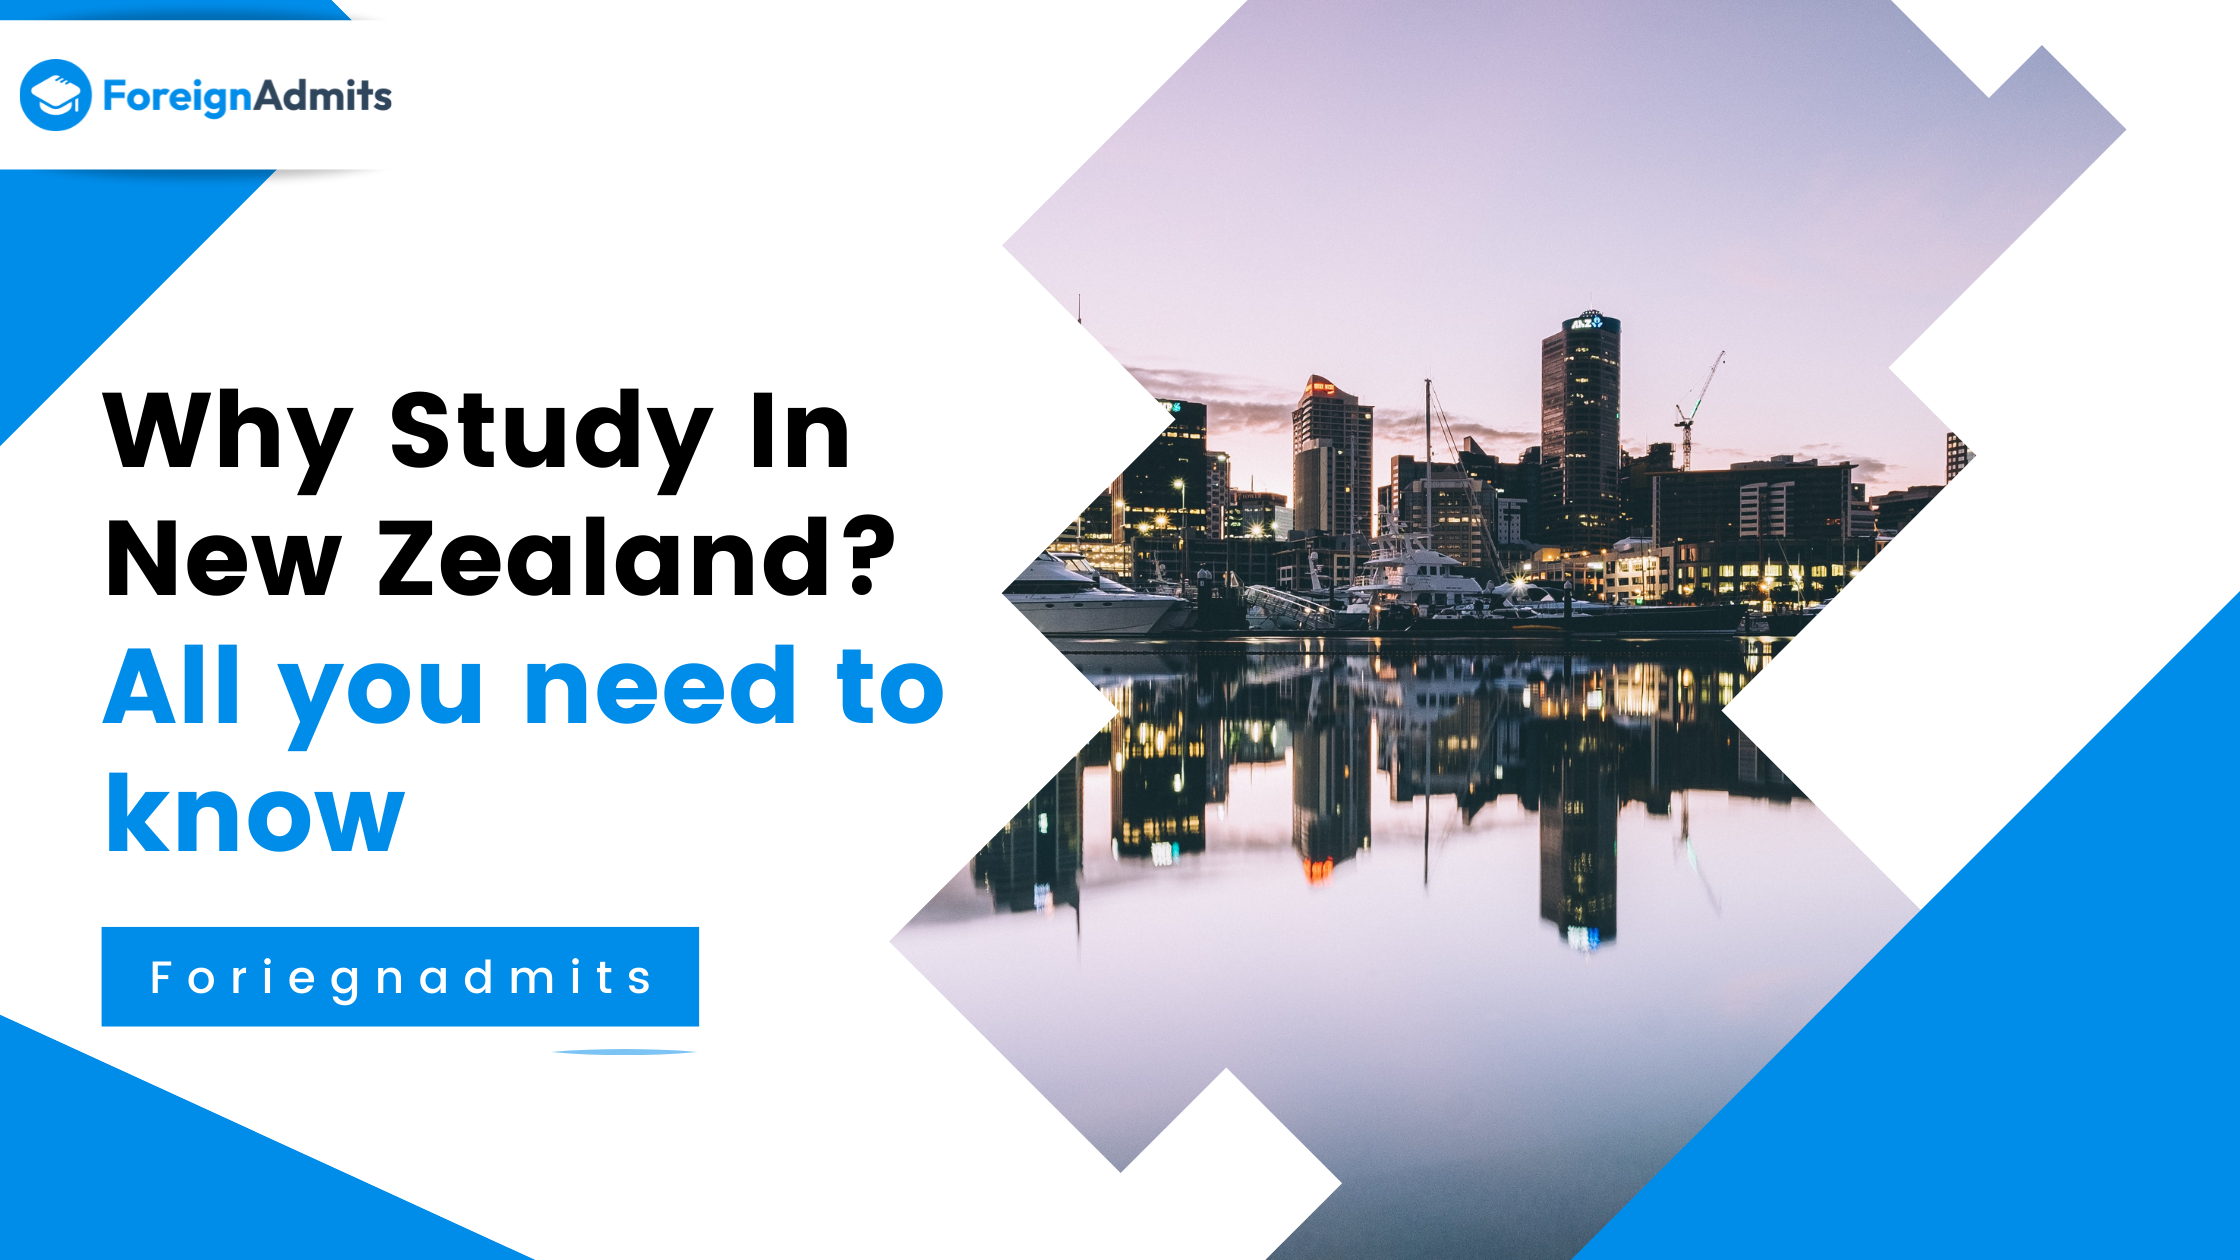 Why Study In New Zealand? – All you need to know